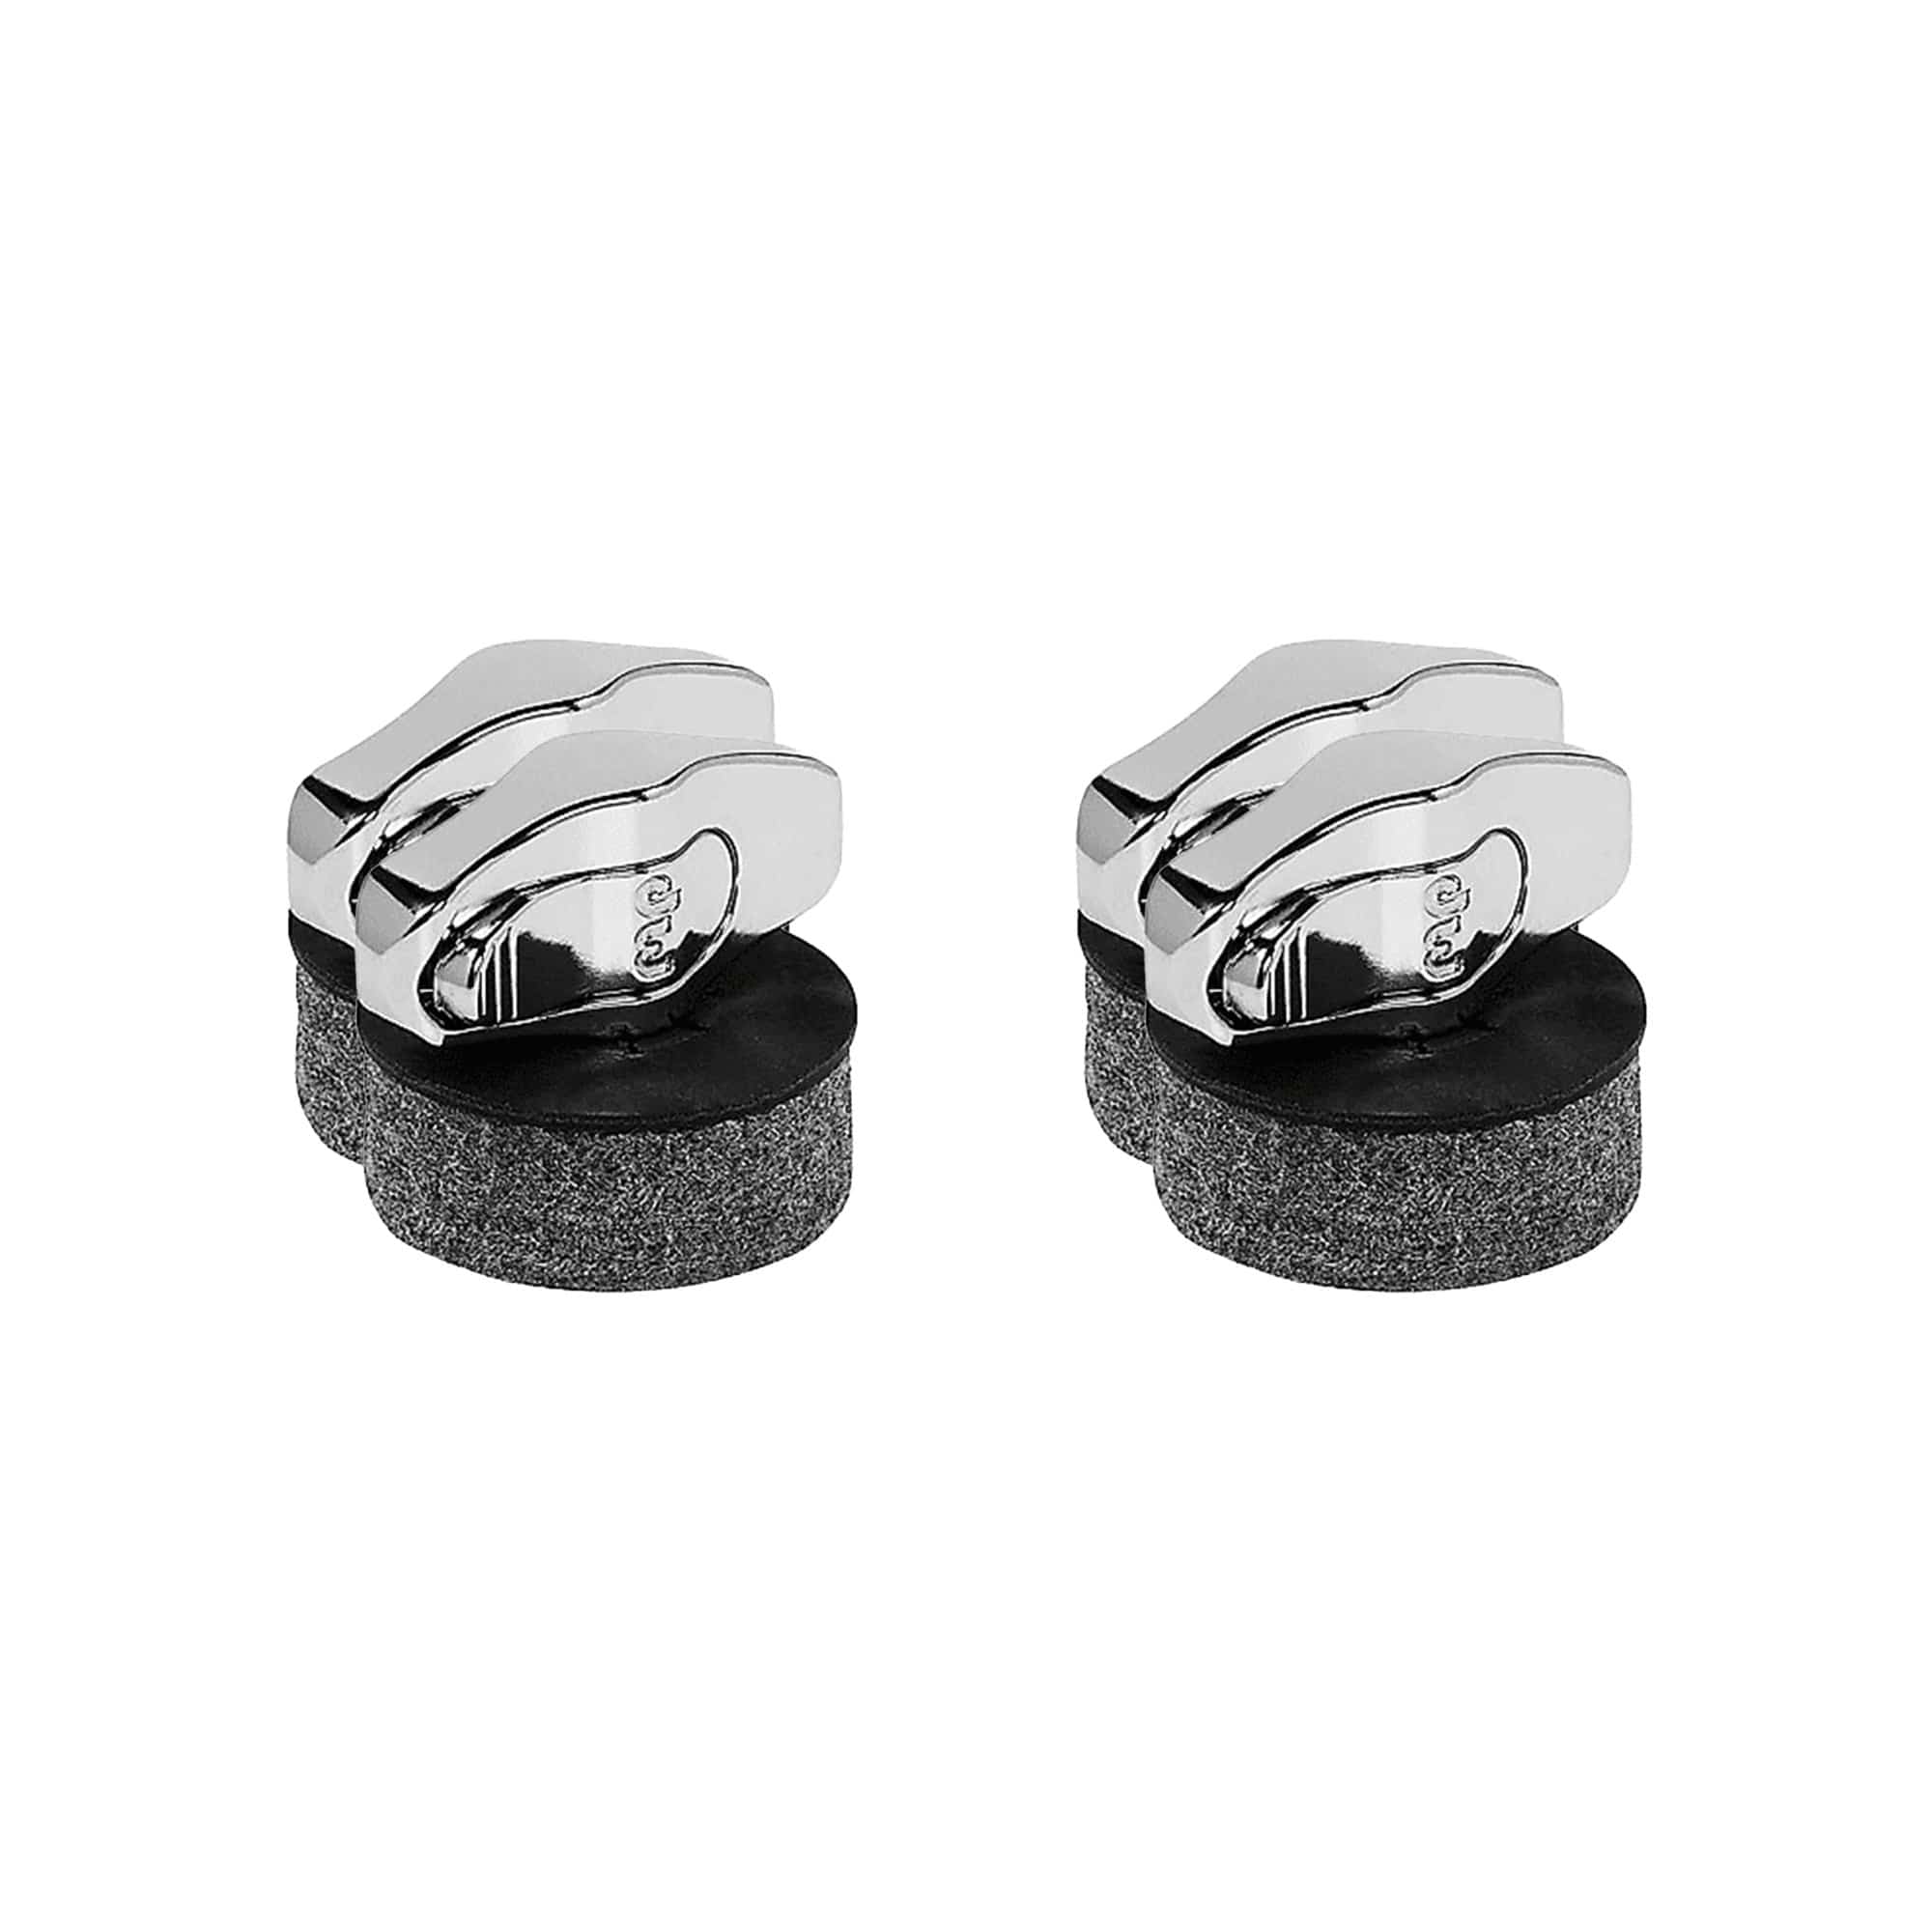 DW Quick Release Wingnuts (4 Pack Bundle) Drums and Percussion / Parts and Accessories / Mounts